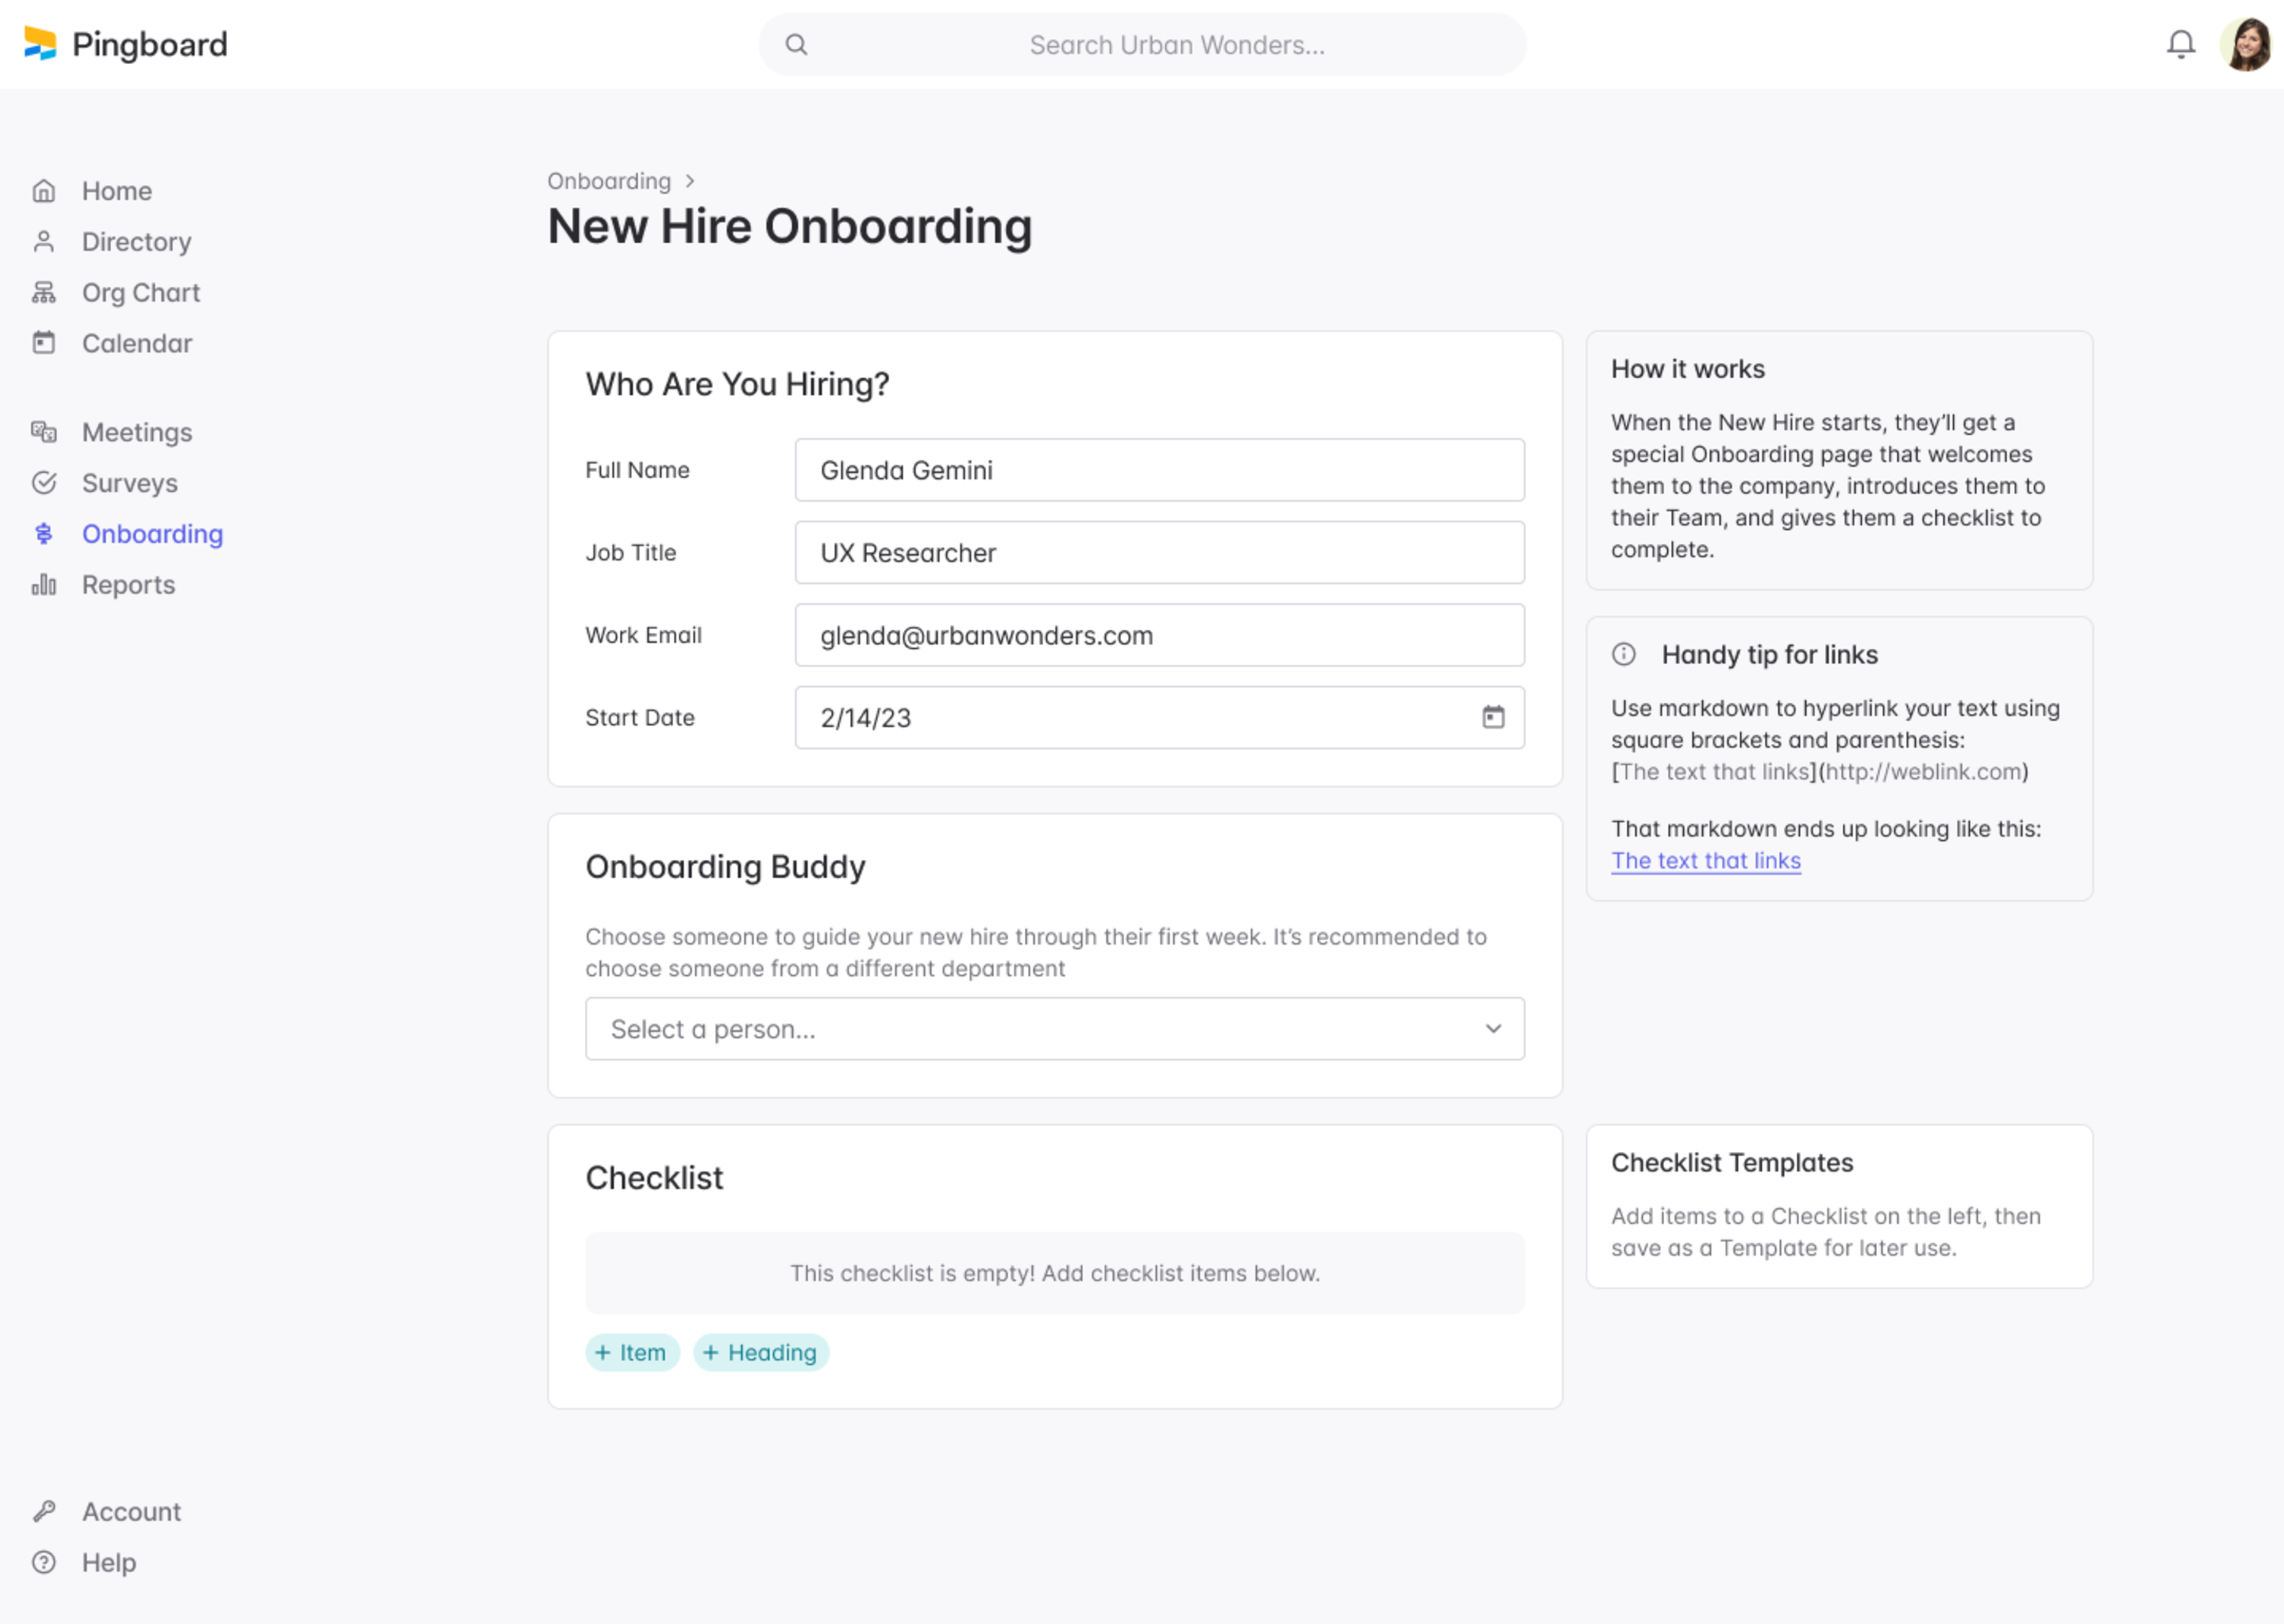 Onboarding Checklist Template Setup in Pingboard